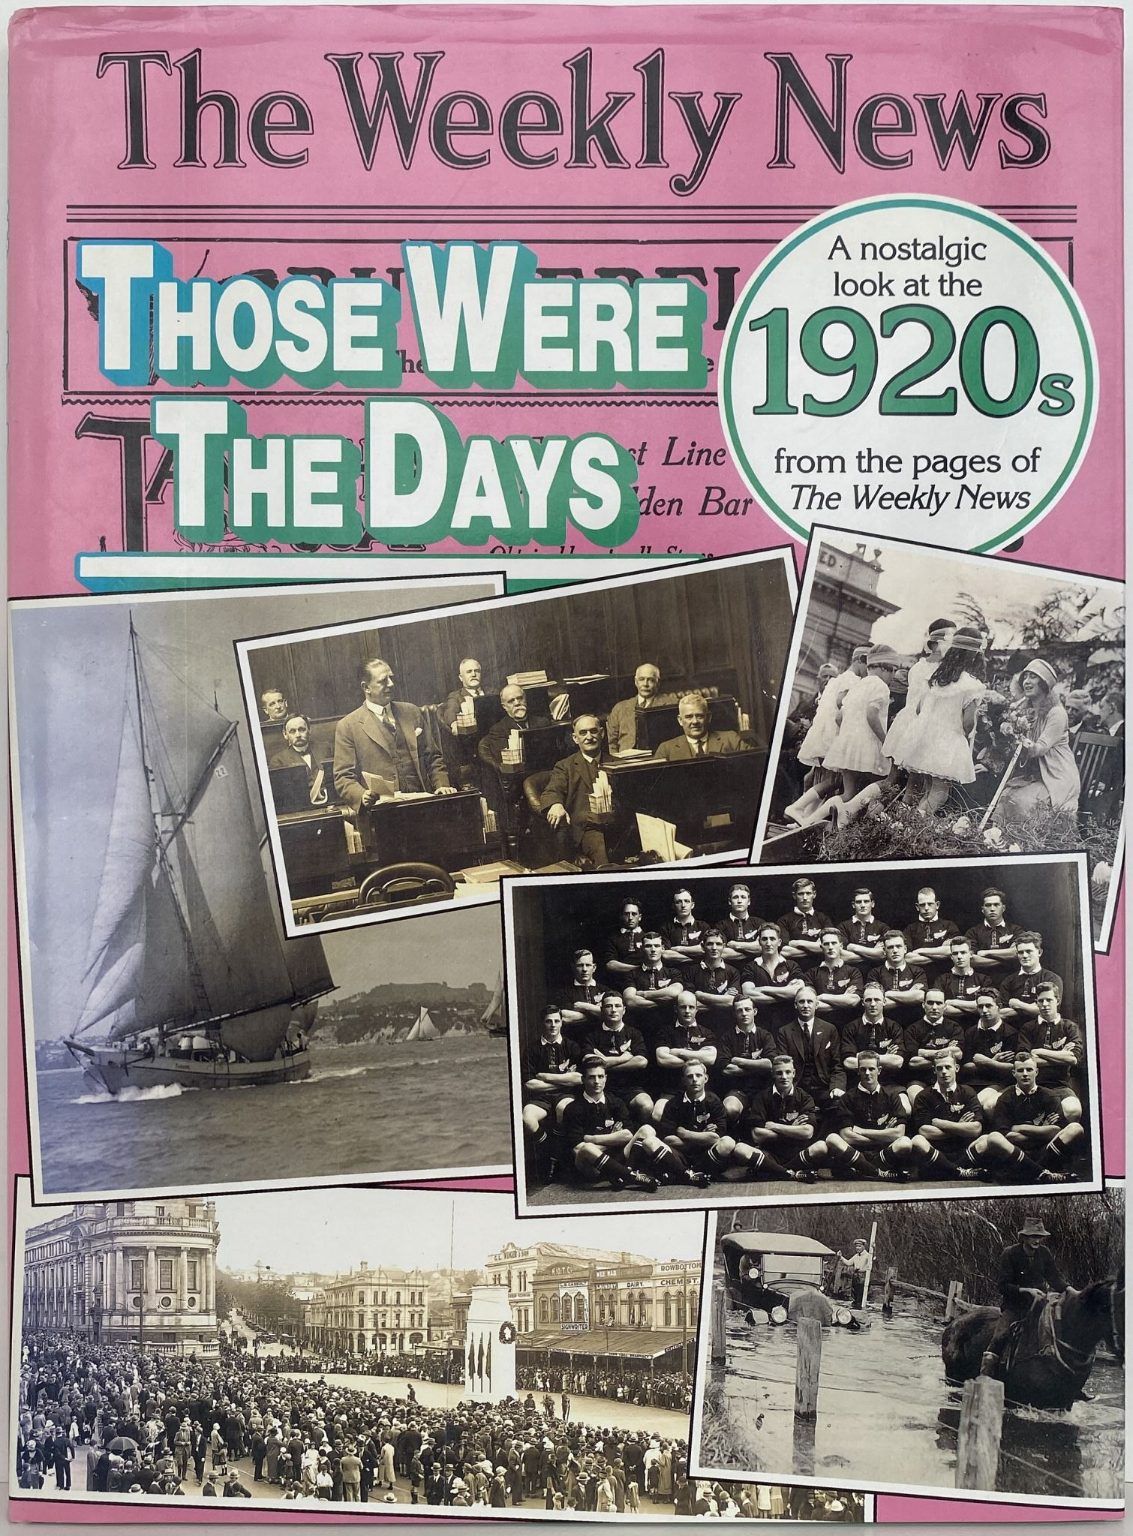 THOSE WERE THE DAYS: A nostalgic look at The Weekly News 1920s